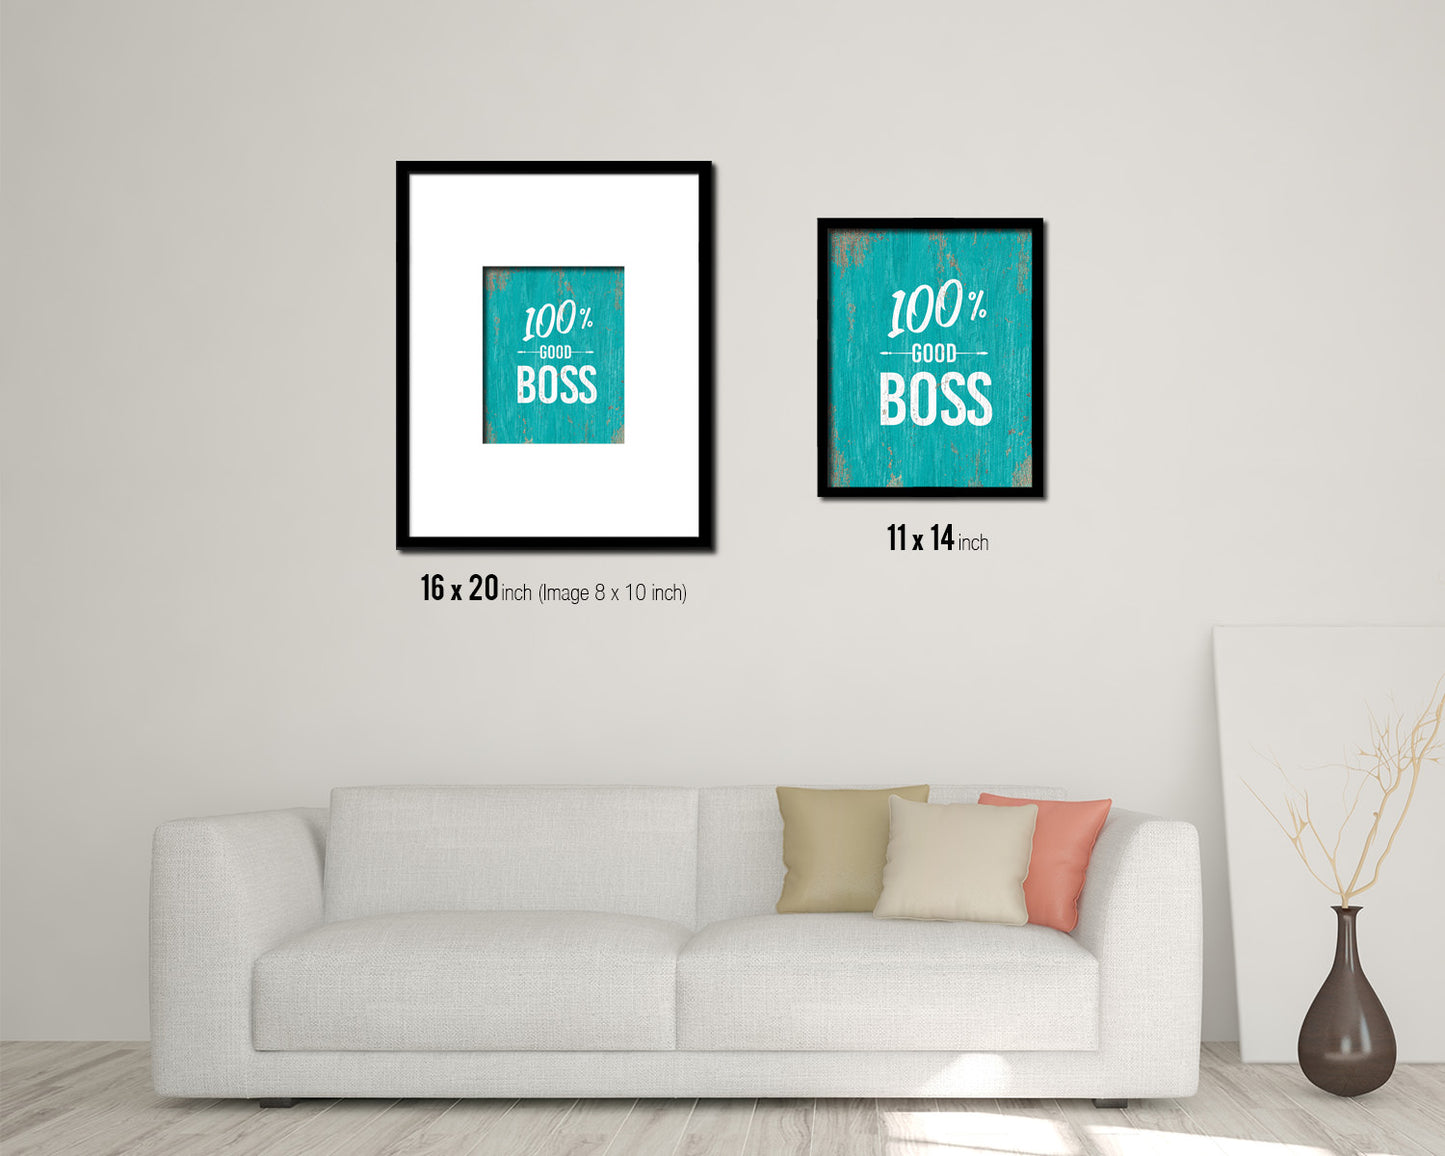 100% Good boss Quote Framed Print Wall Decor Art Gifts